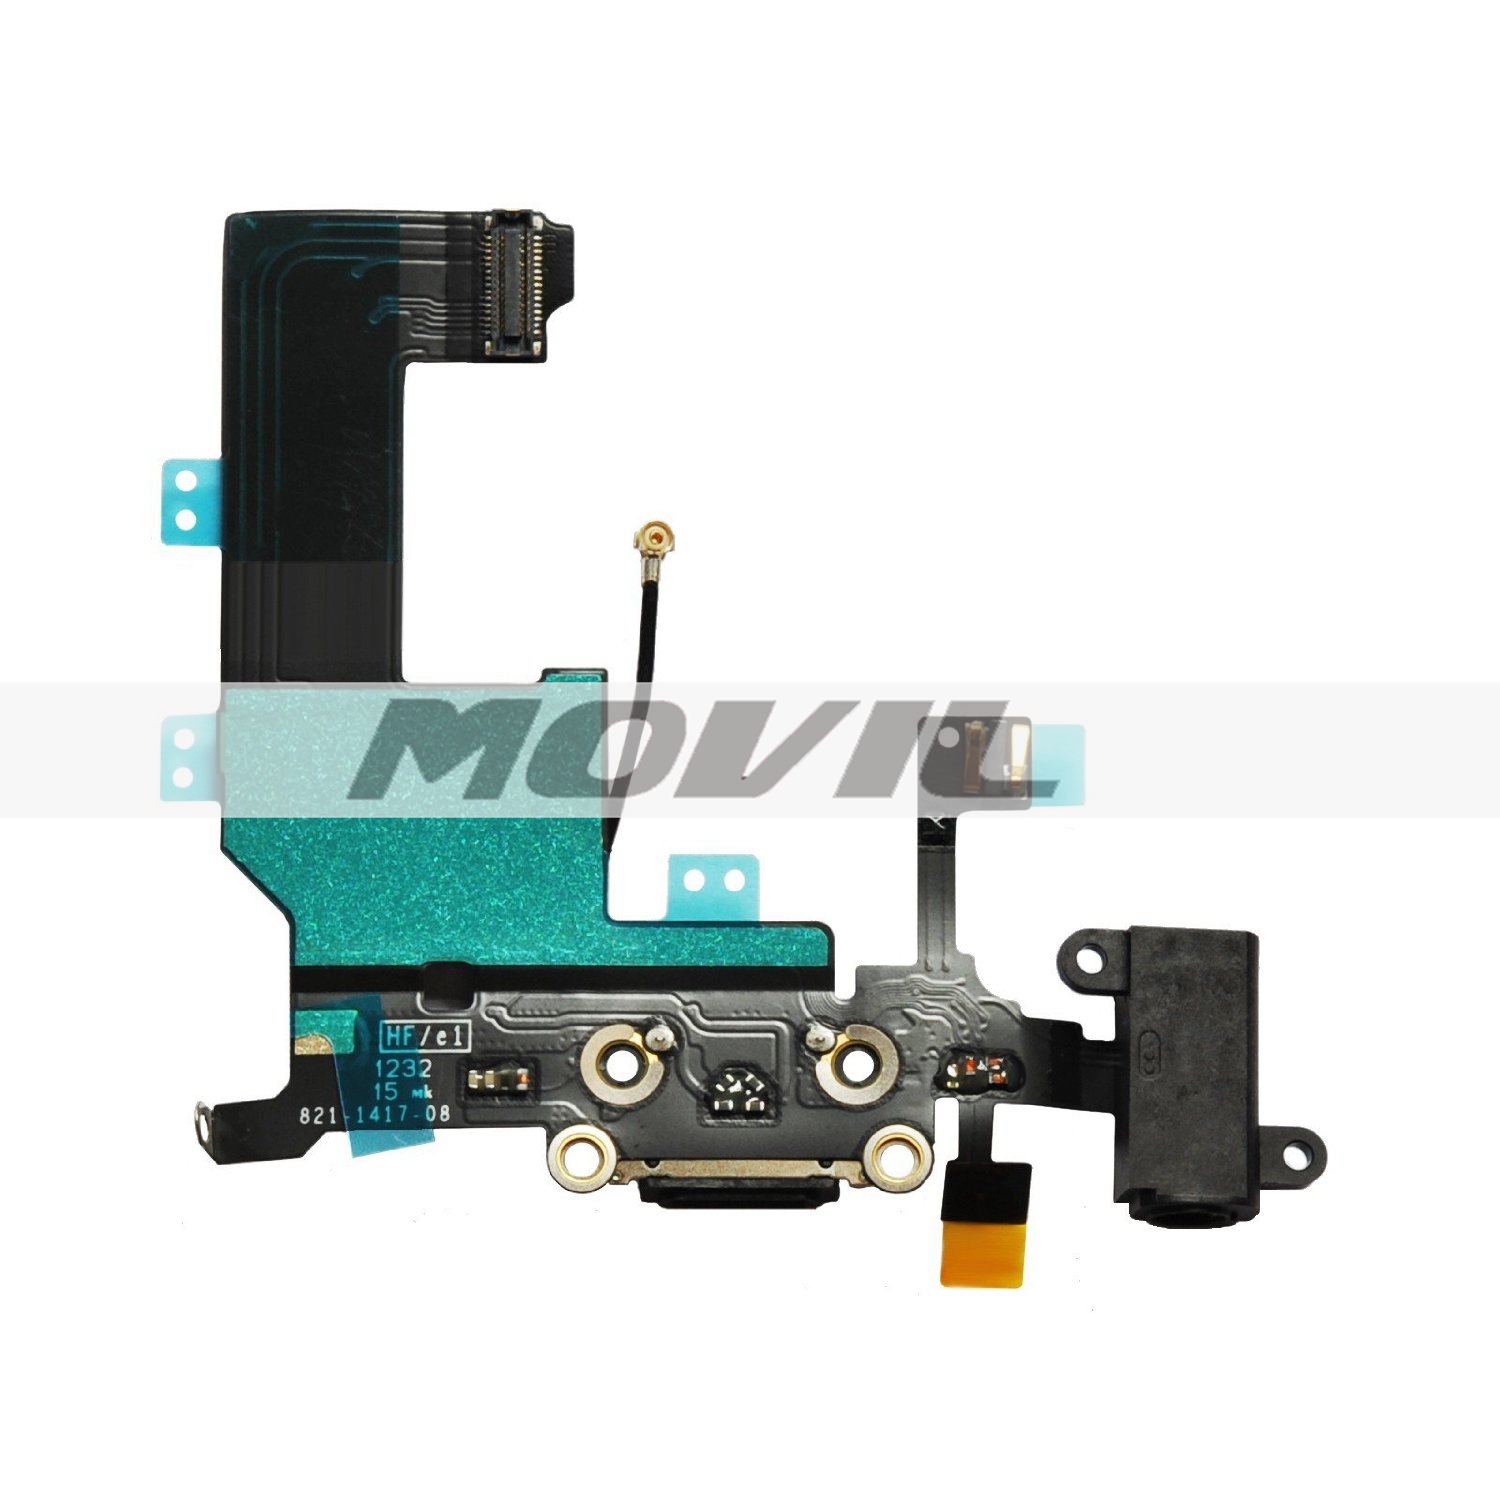 iPhone 5C Black Charger Port Dock Connector Flex Cable With Head Phone Audio Jack USB Port Charging port